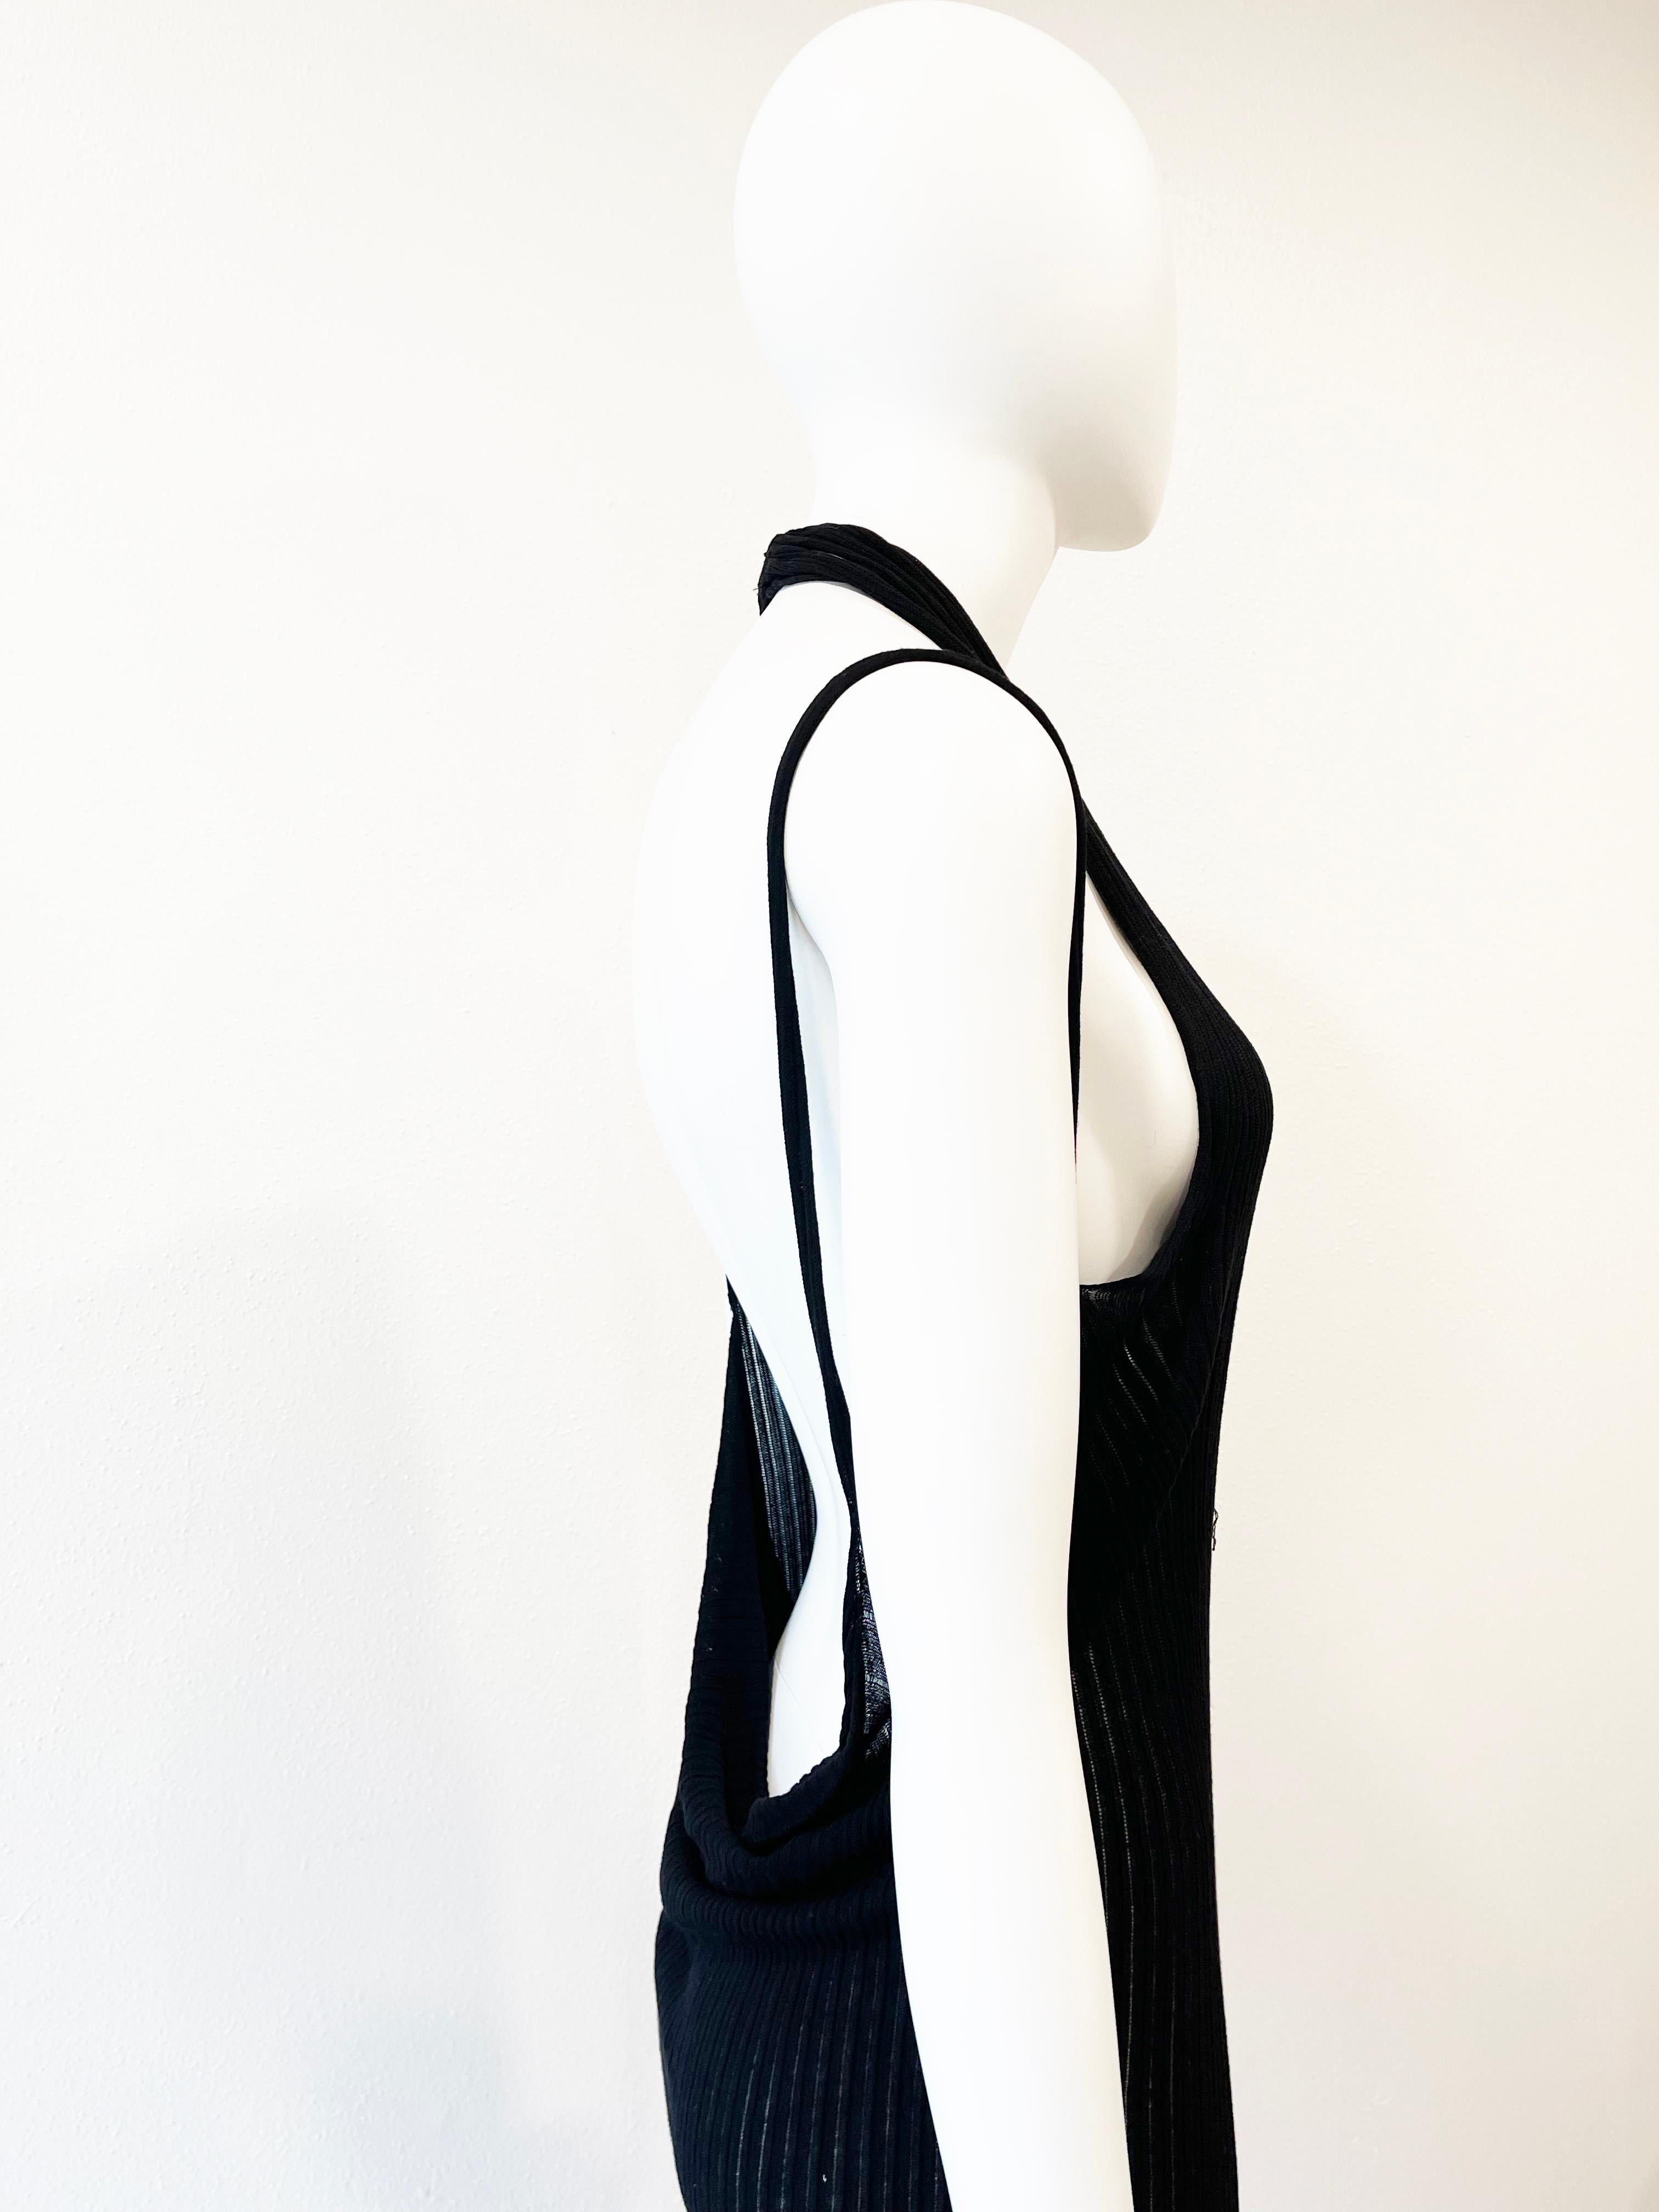 1990s JEAN PAUL GAULTIER ribbed semi sheer halter dress - stretchy
Deep V
Low back
Condition: Excellent
30